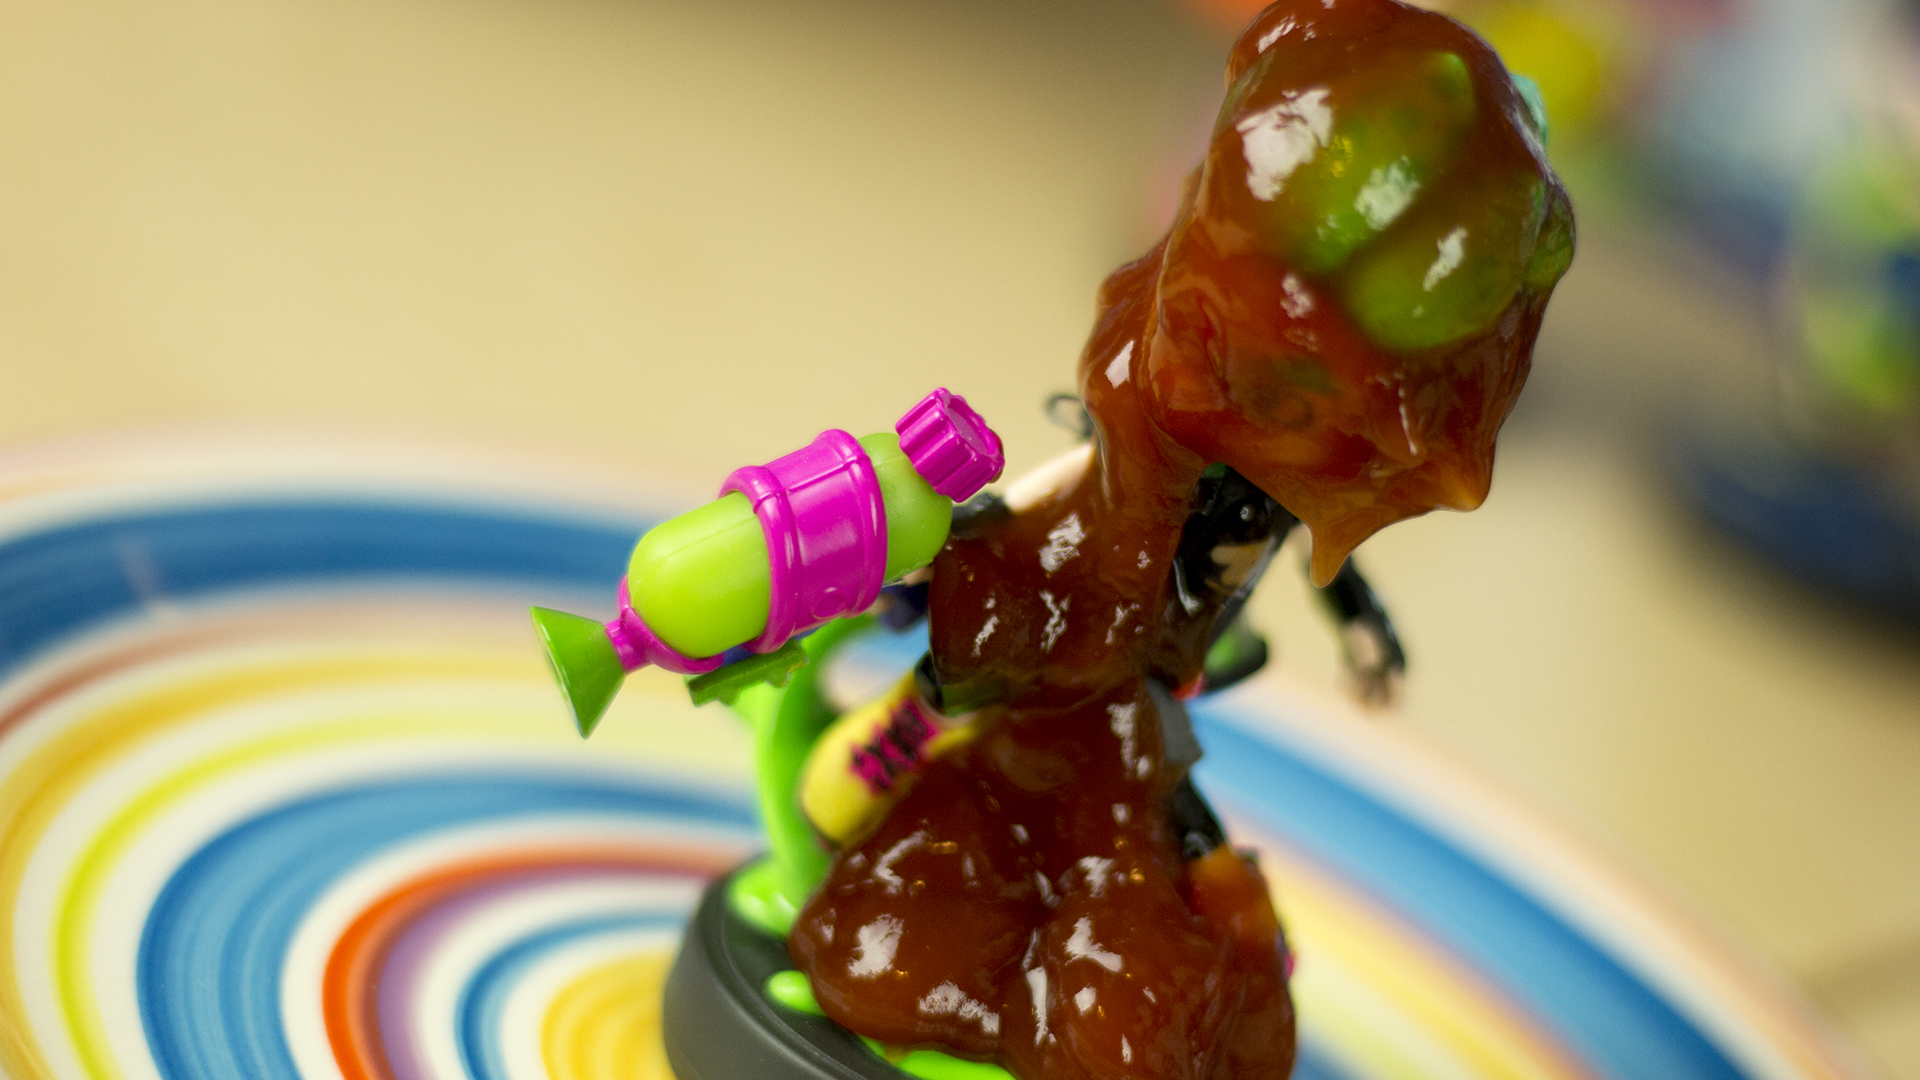 Let’s Settle Splatoon’s Mayo Vs. Ketchup War, With Science